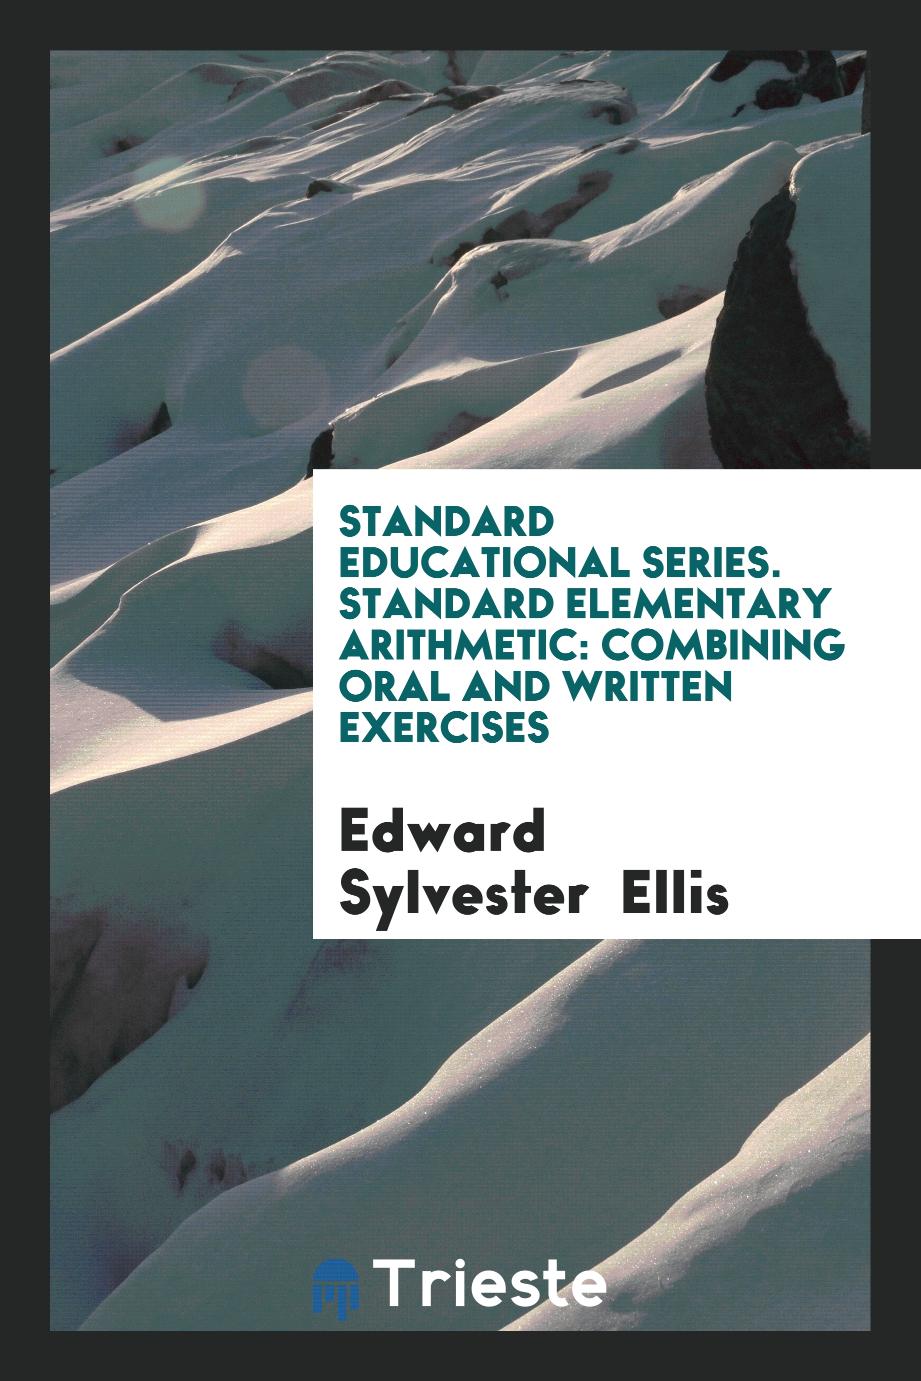 Standard Educational Series. Standard Elementary Arithmetic: Combining Oral and Written Exercises